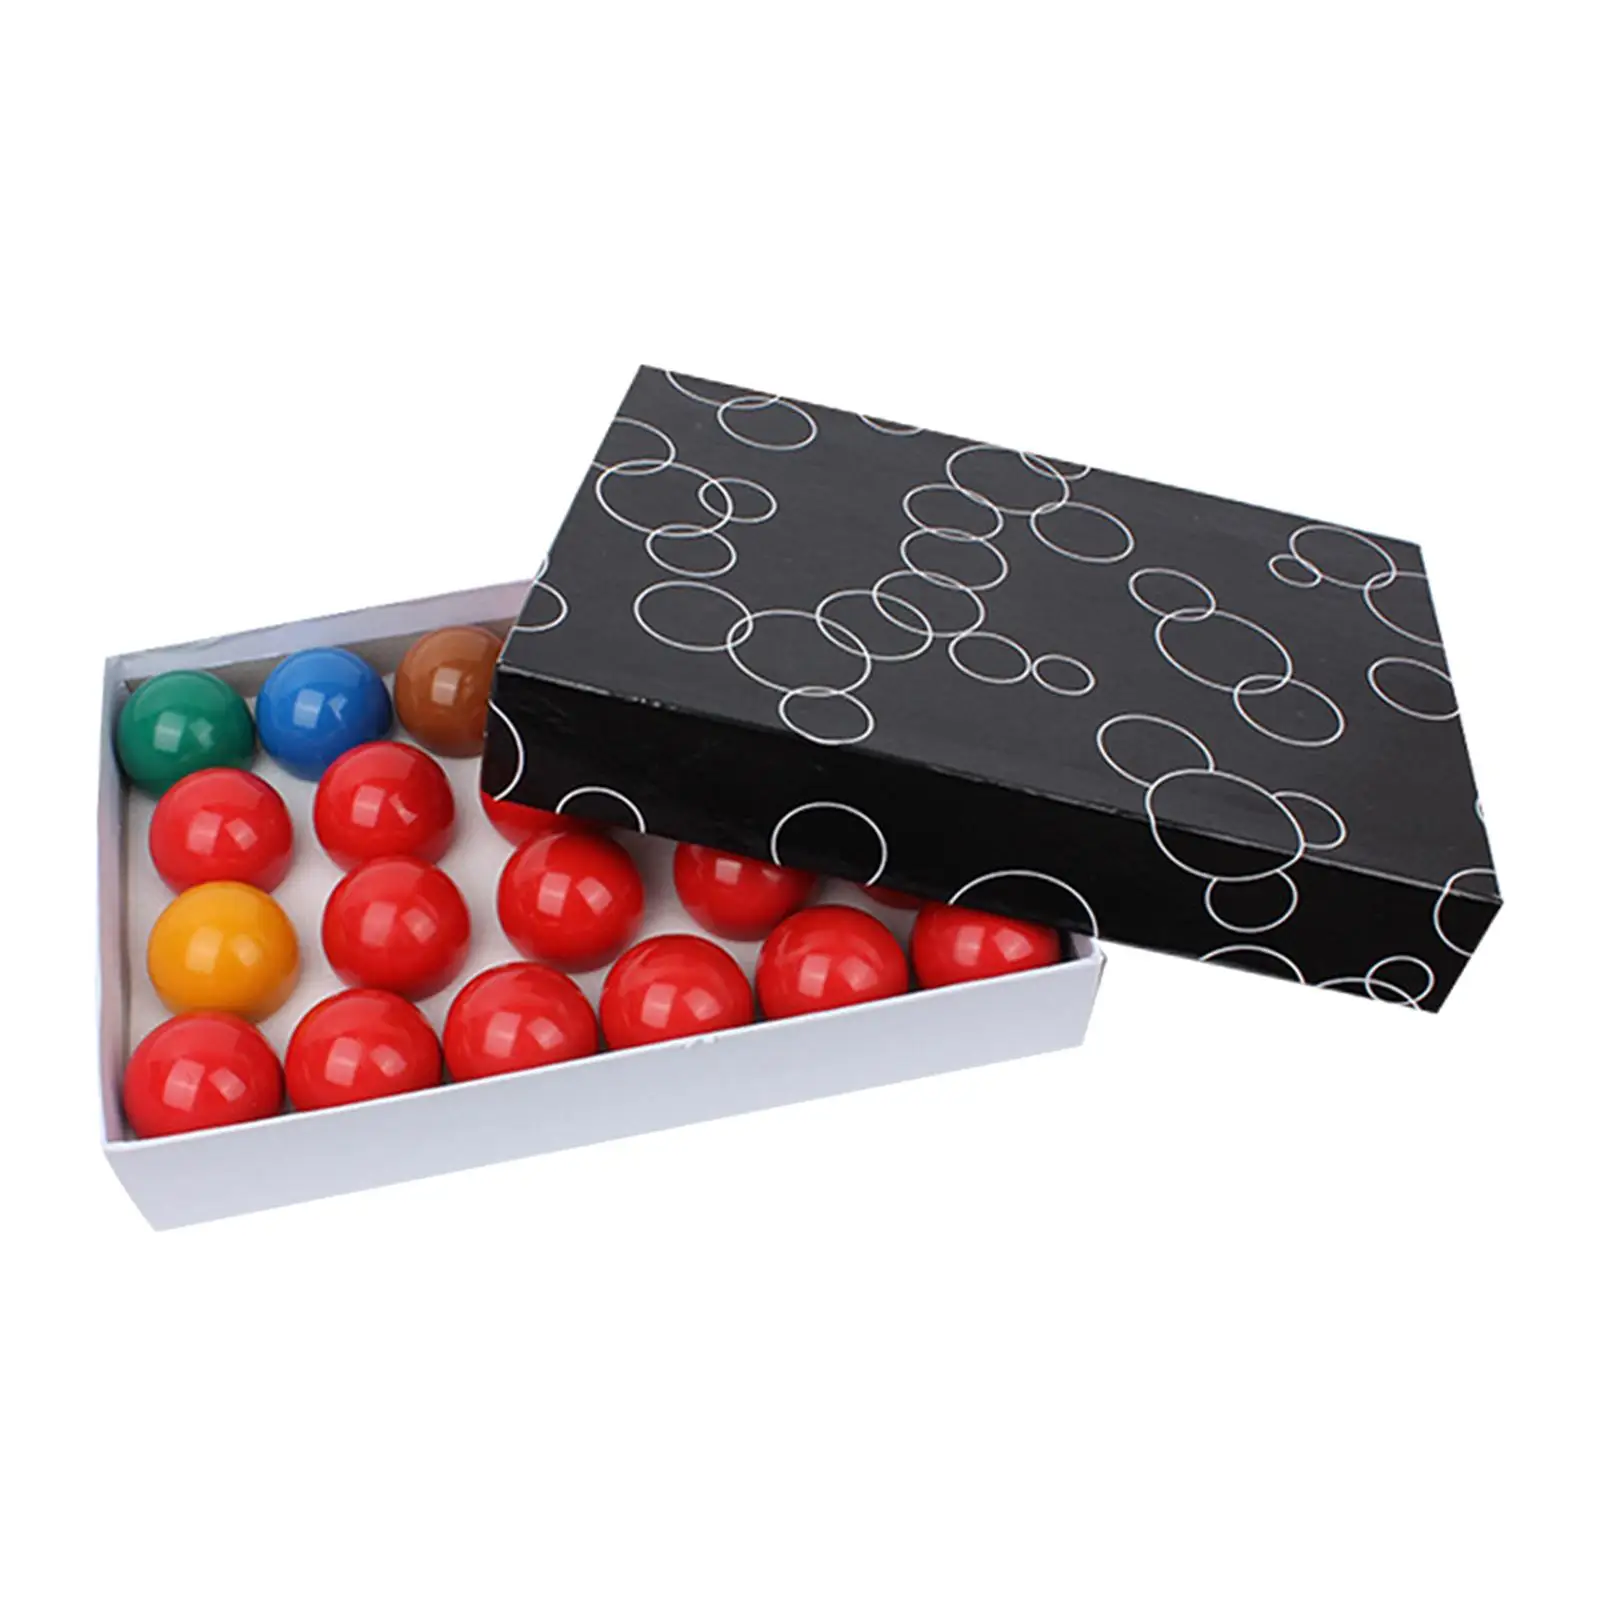 22 Pieces Billiards Table Balls Set, Pool Table Balls Snooker Training Balls Professional Snooker Ball Set for Leisure Sports